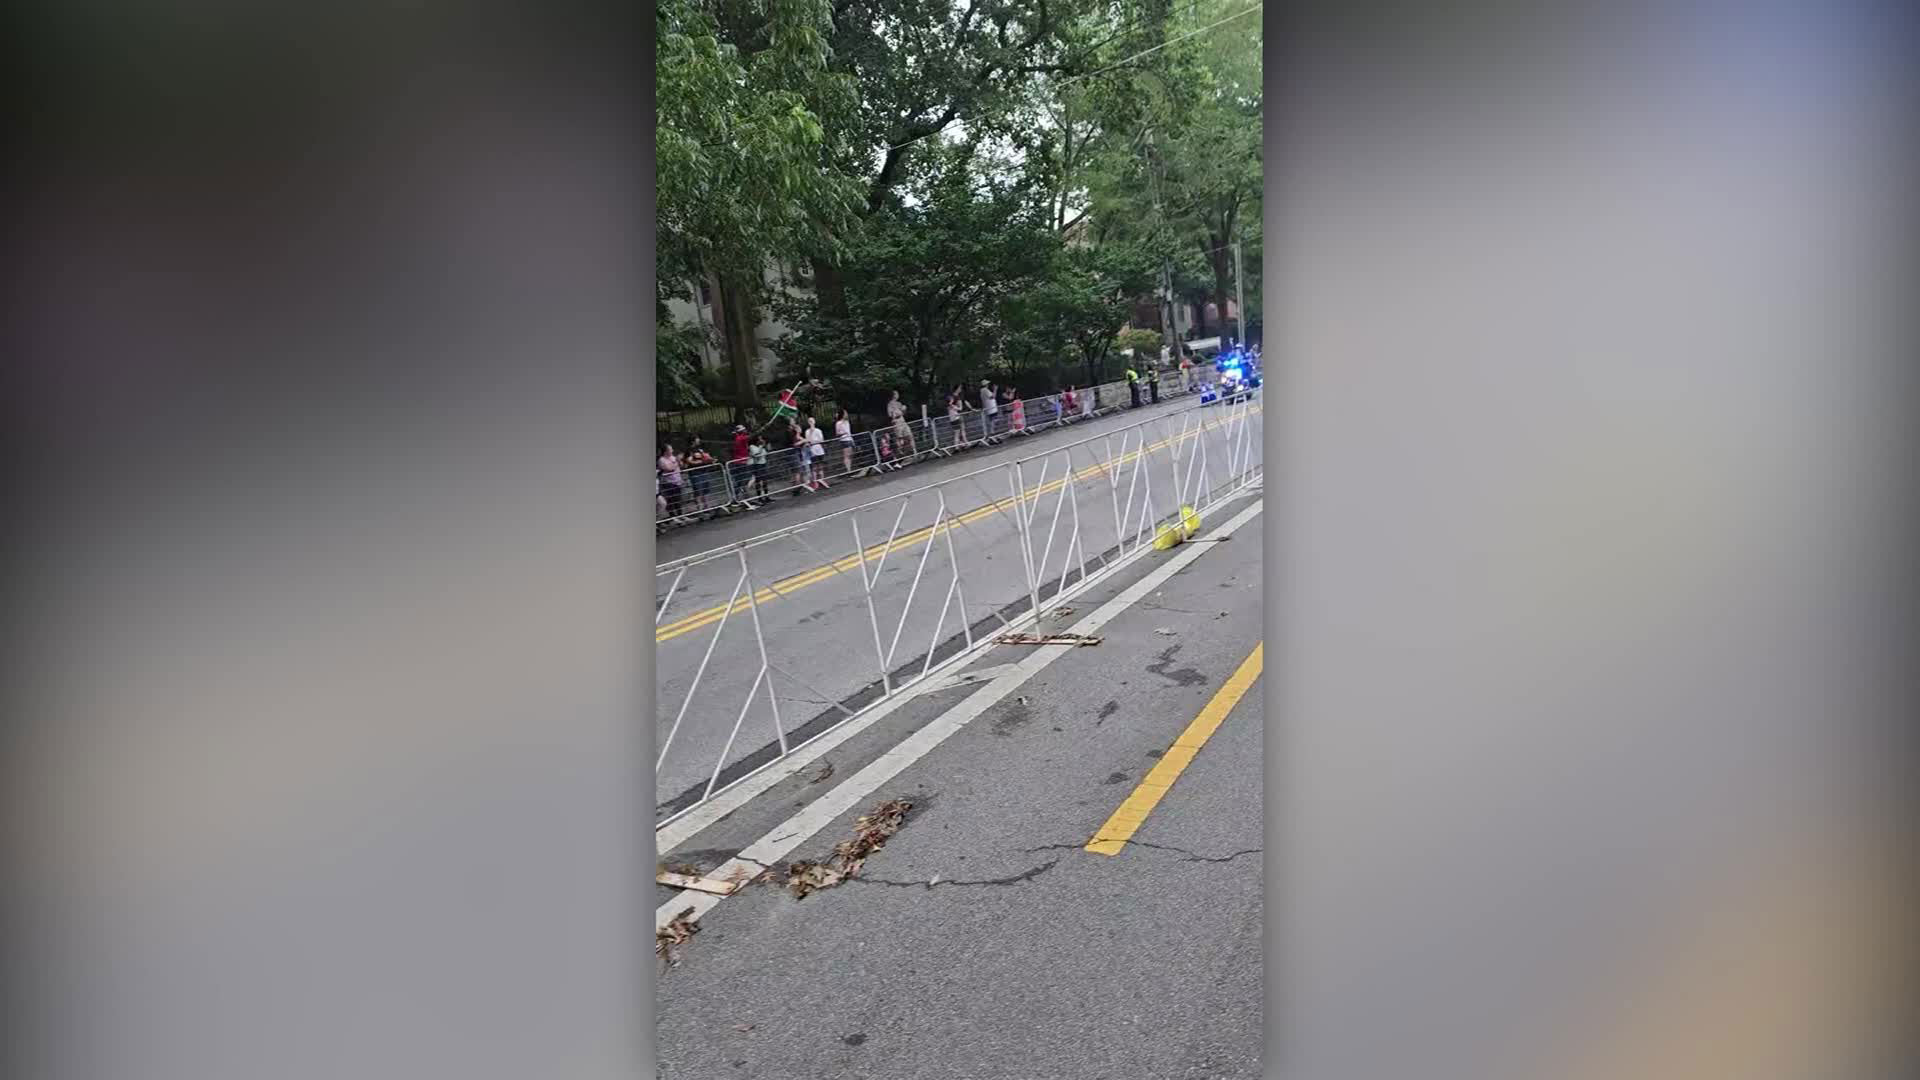 runner goes off course during race